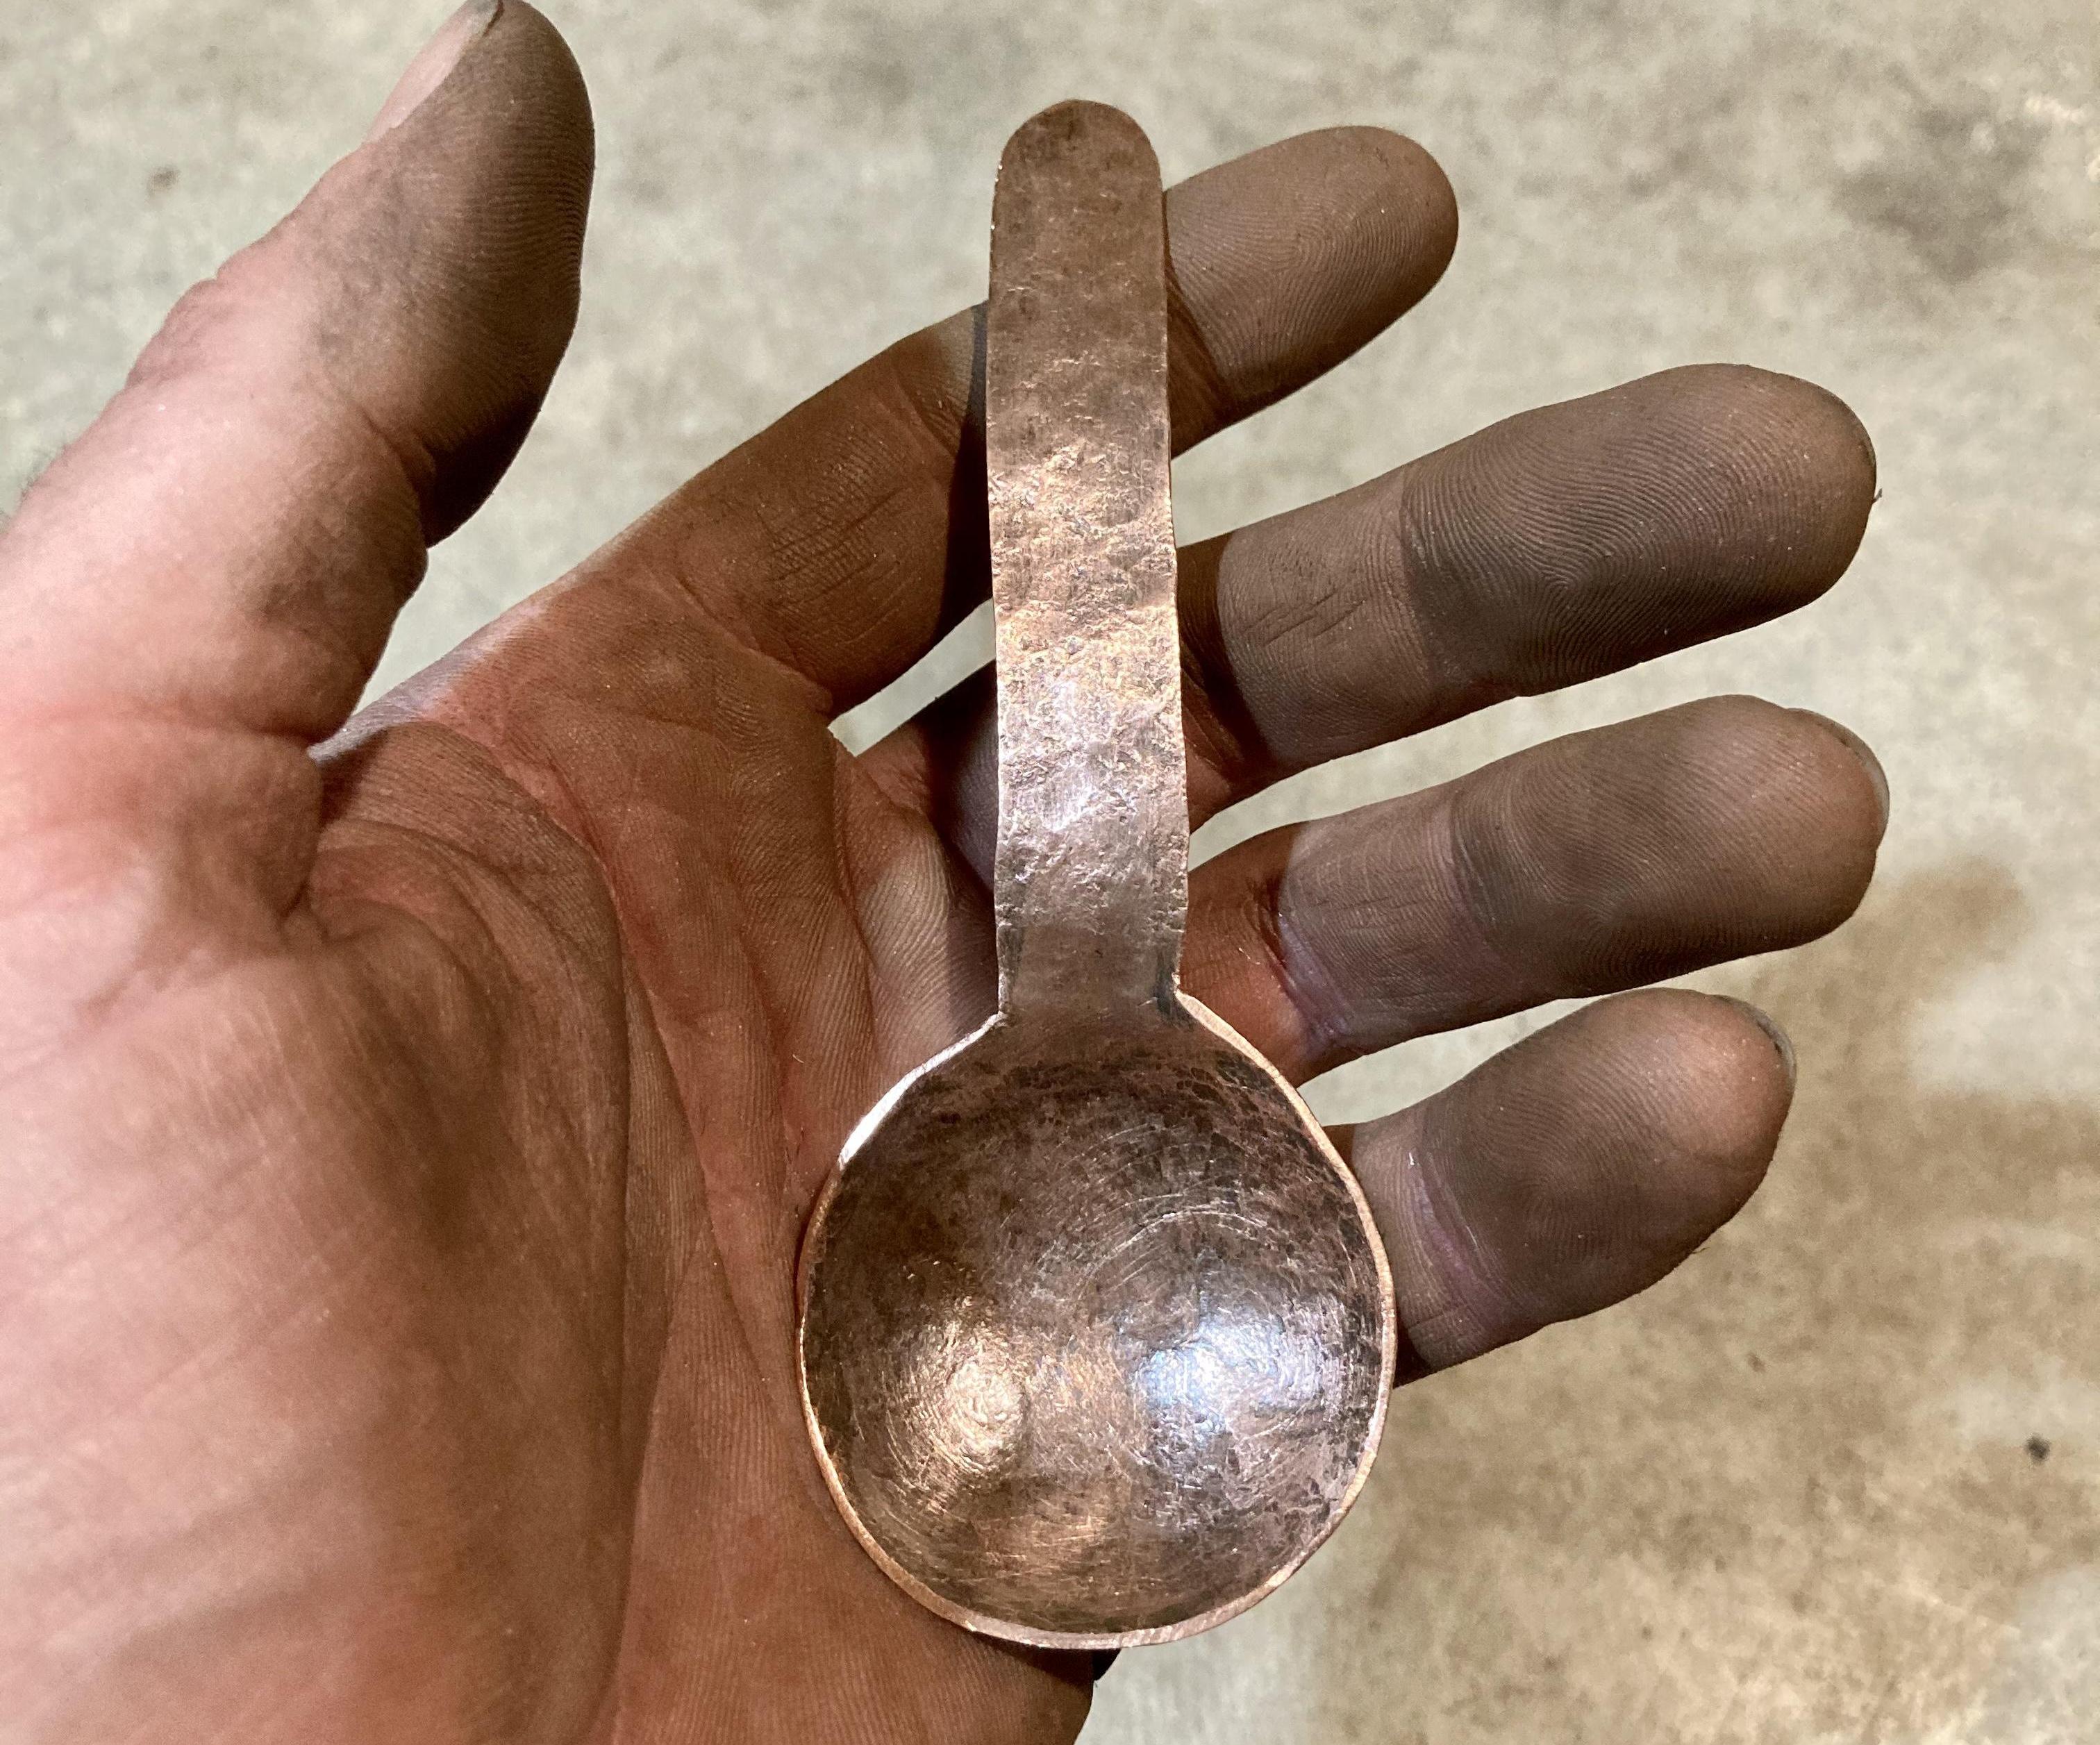 Hammered Copper Spoon With Simple Tools and Materials